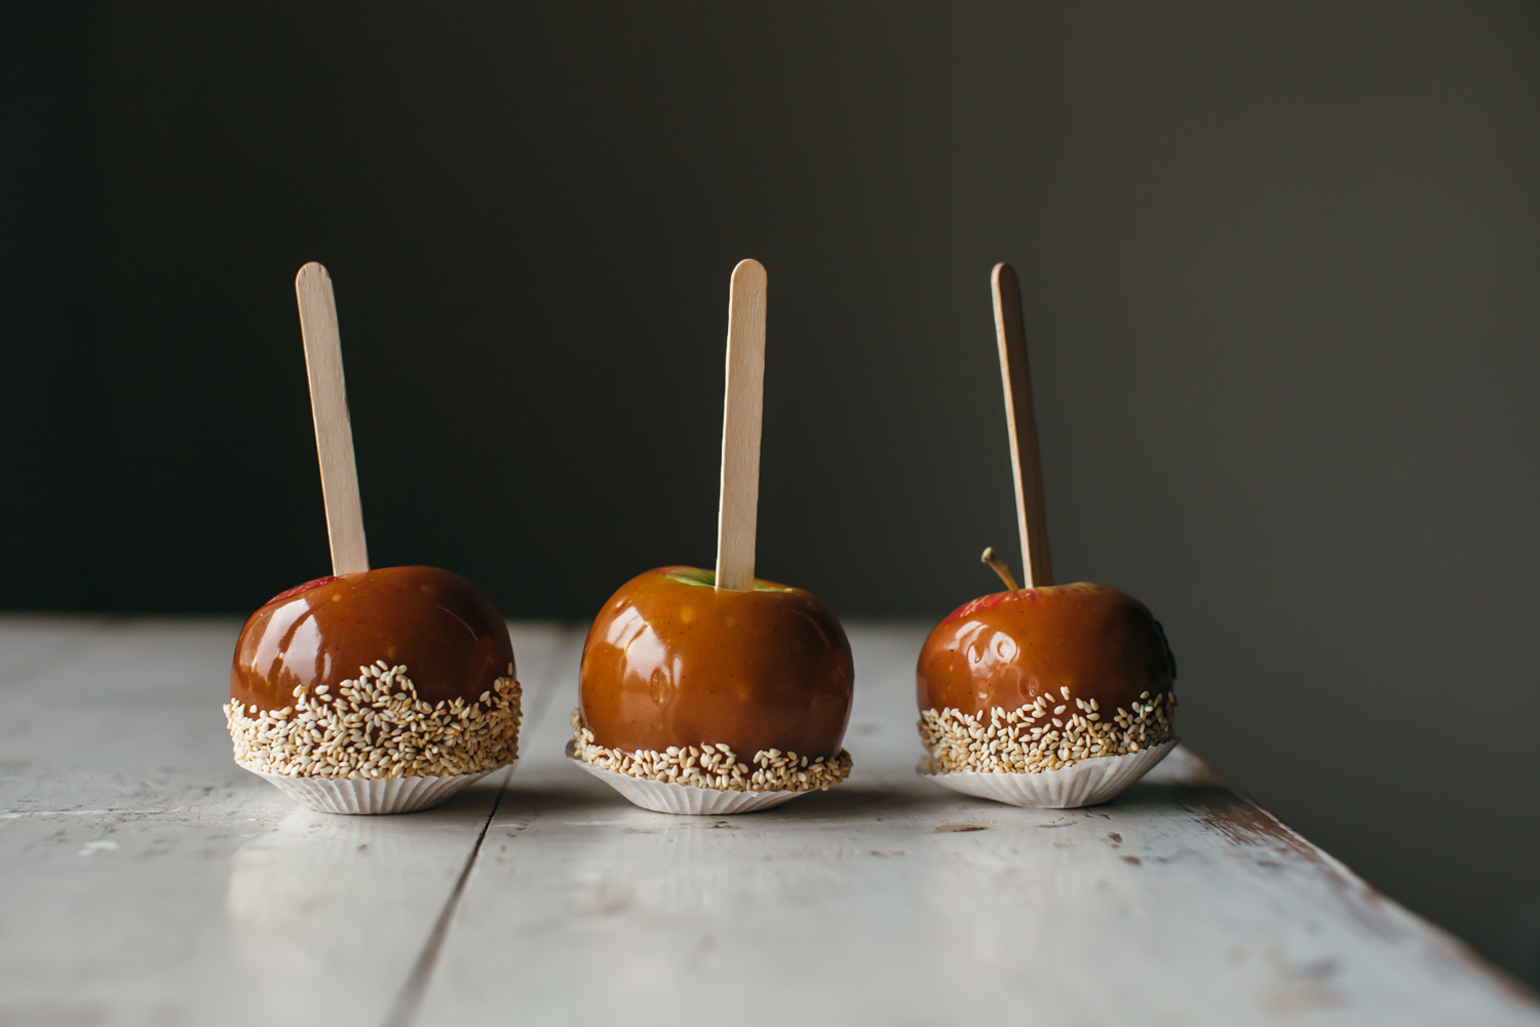 7 Mouthwatering Fall Dessert Recipes With an Unexpected Twist